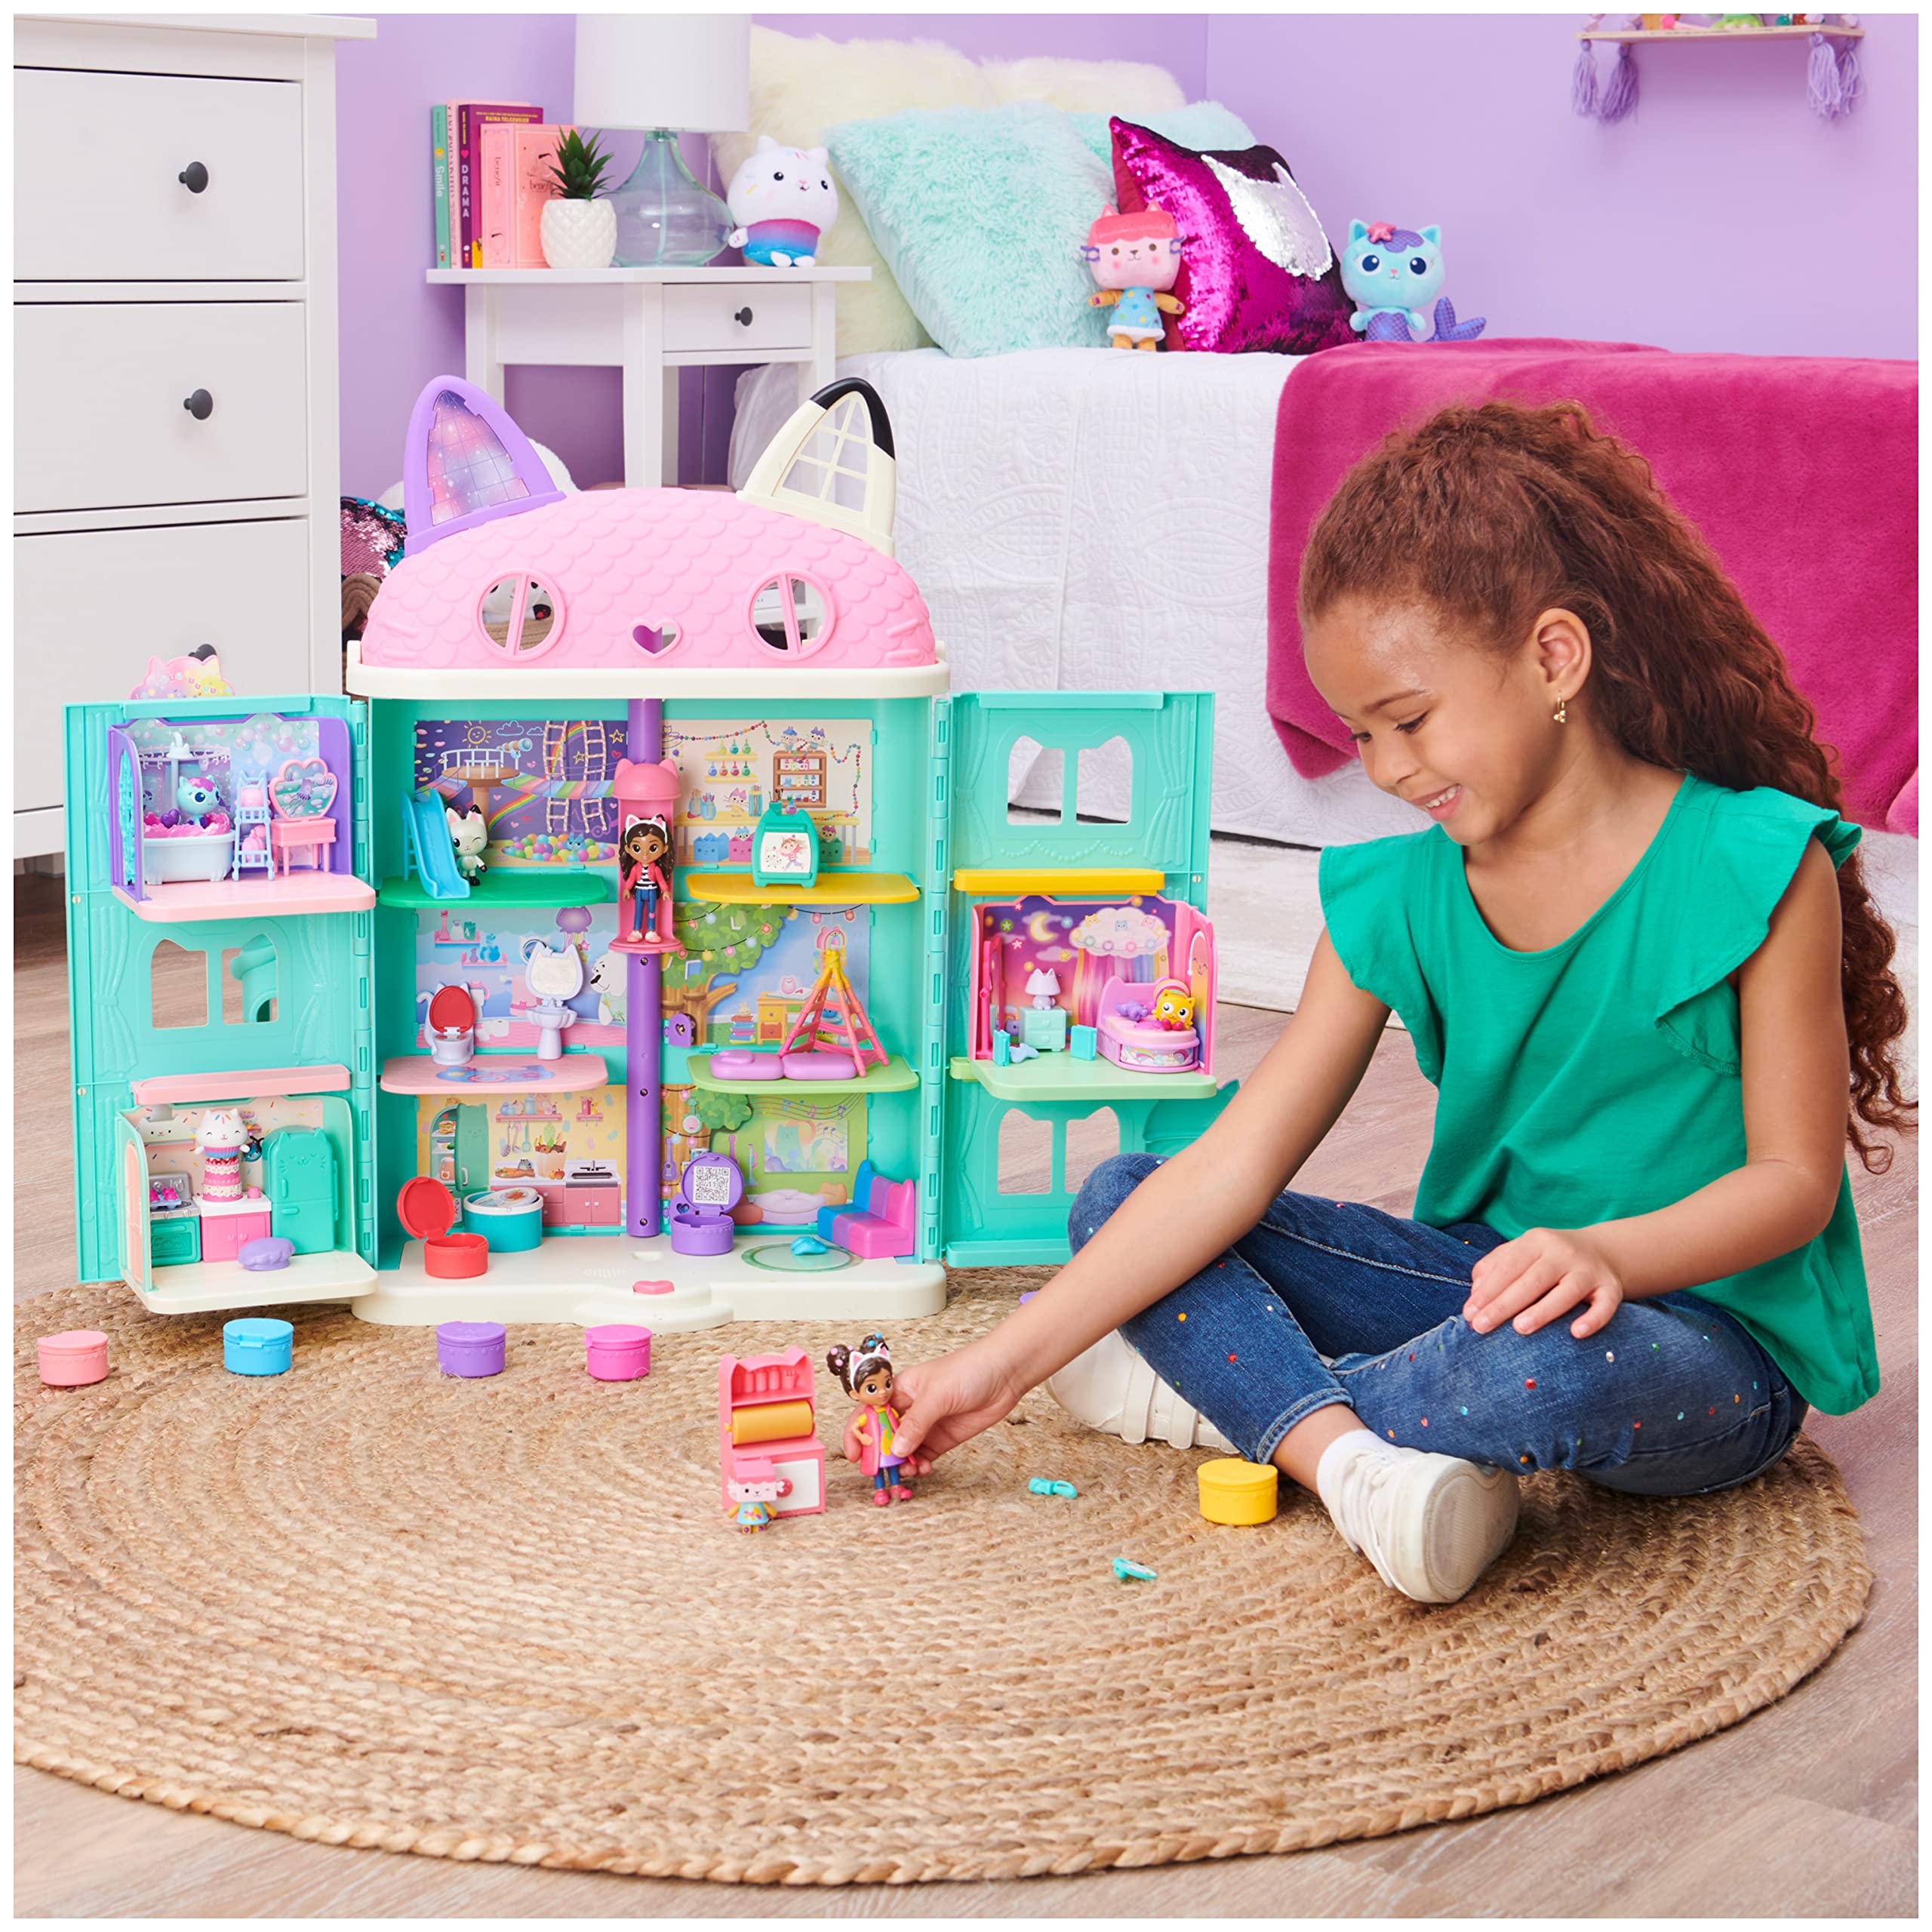 Gabby’s Dollhouse, Art Studio Set with 2 Toy Figures, 2 Accessories, Delivery and Furniture Piece, Kids Toys for Ages 3 and up